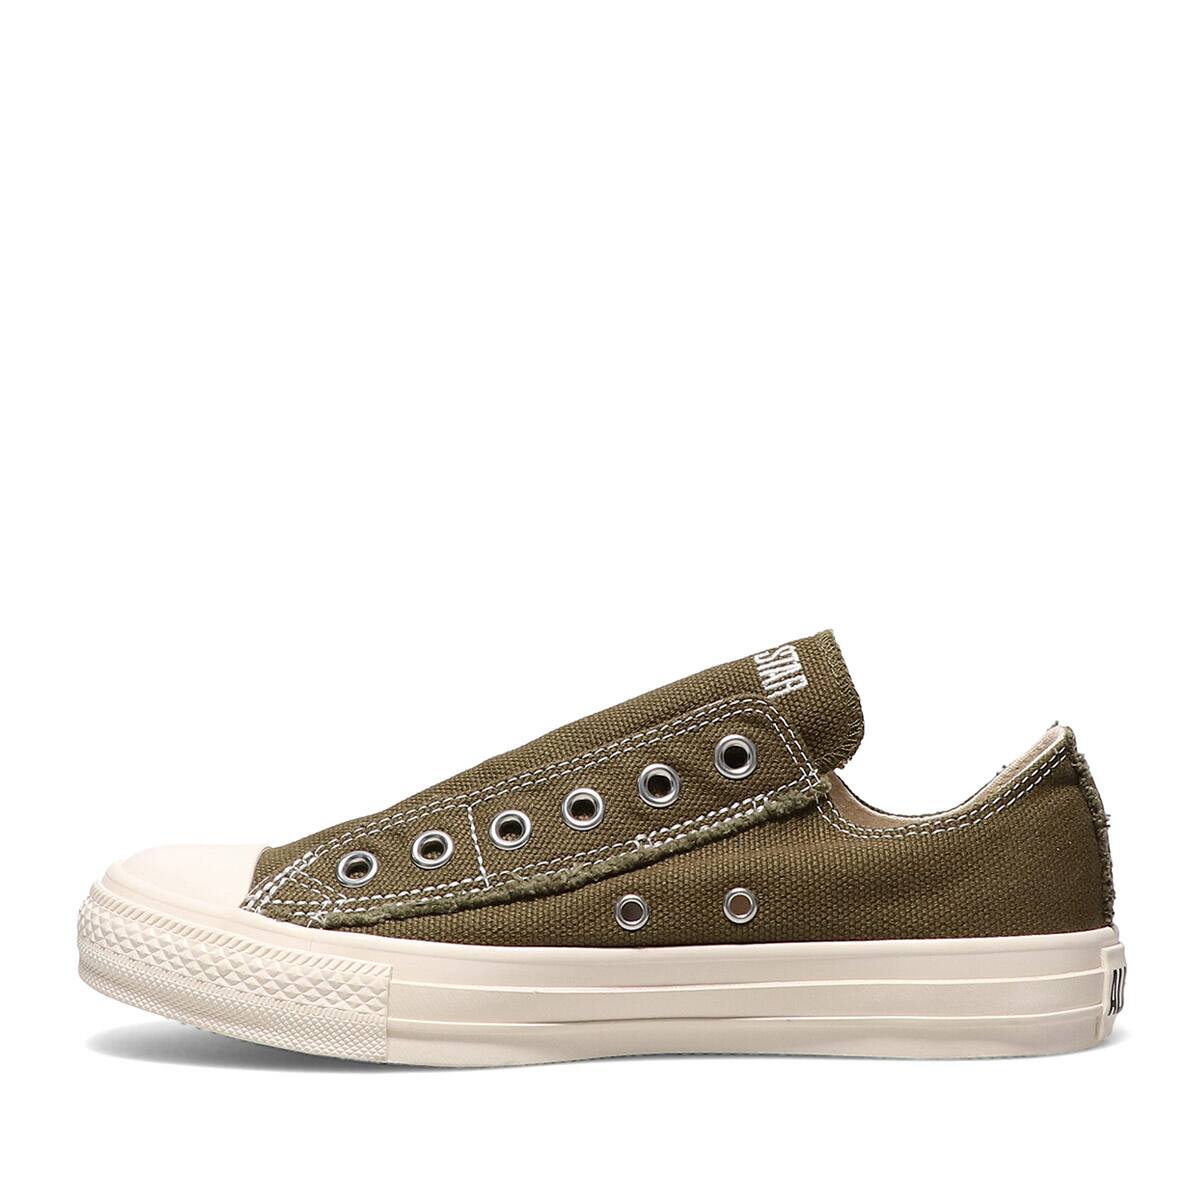 CONVERSE ALL STAR ROUGHCANVAS SLIP OX OLIVE 22SS-I